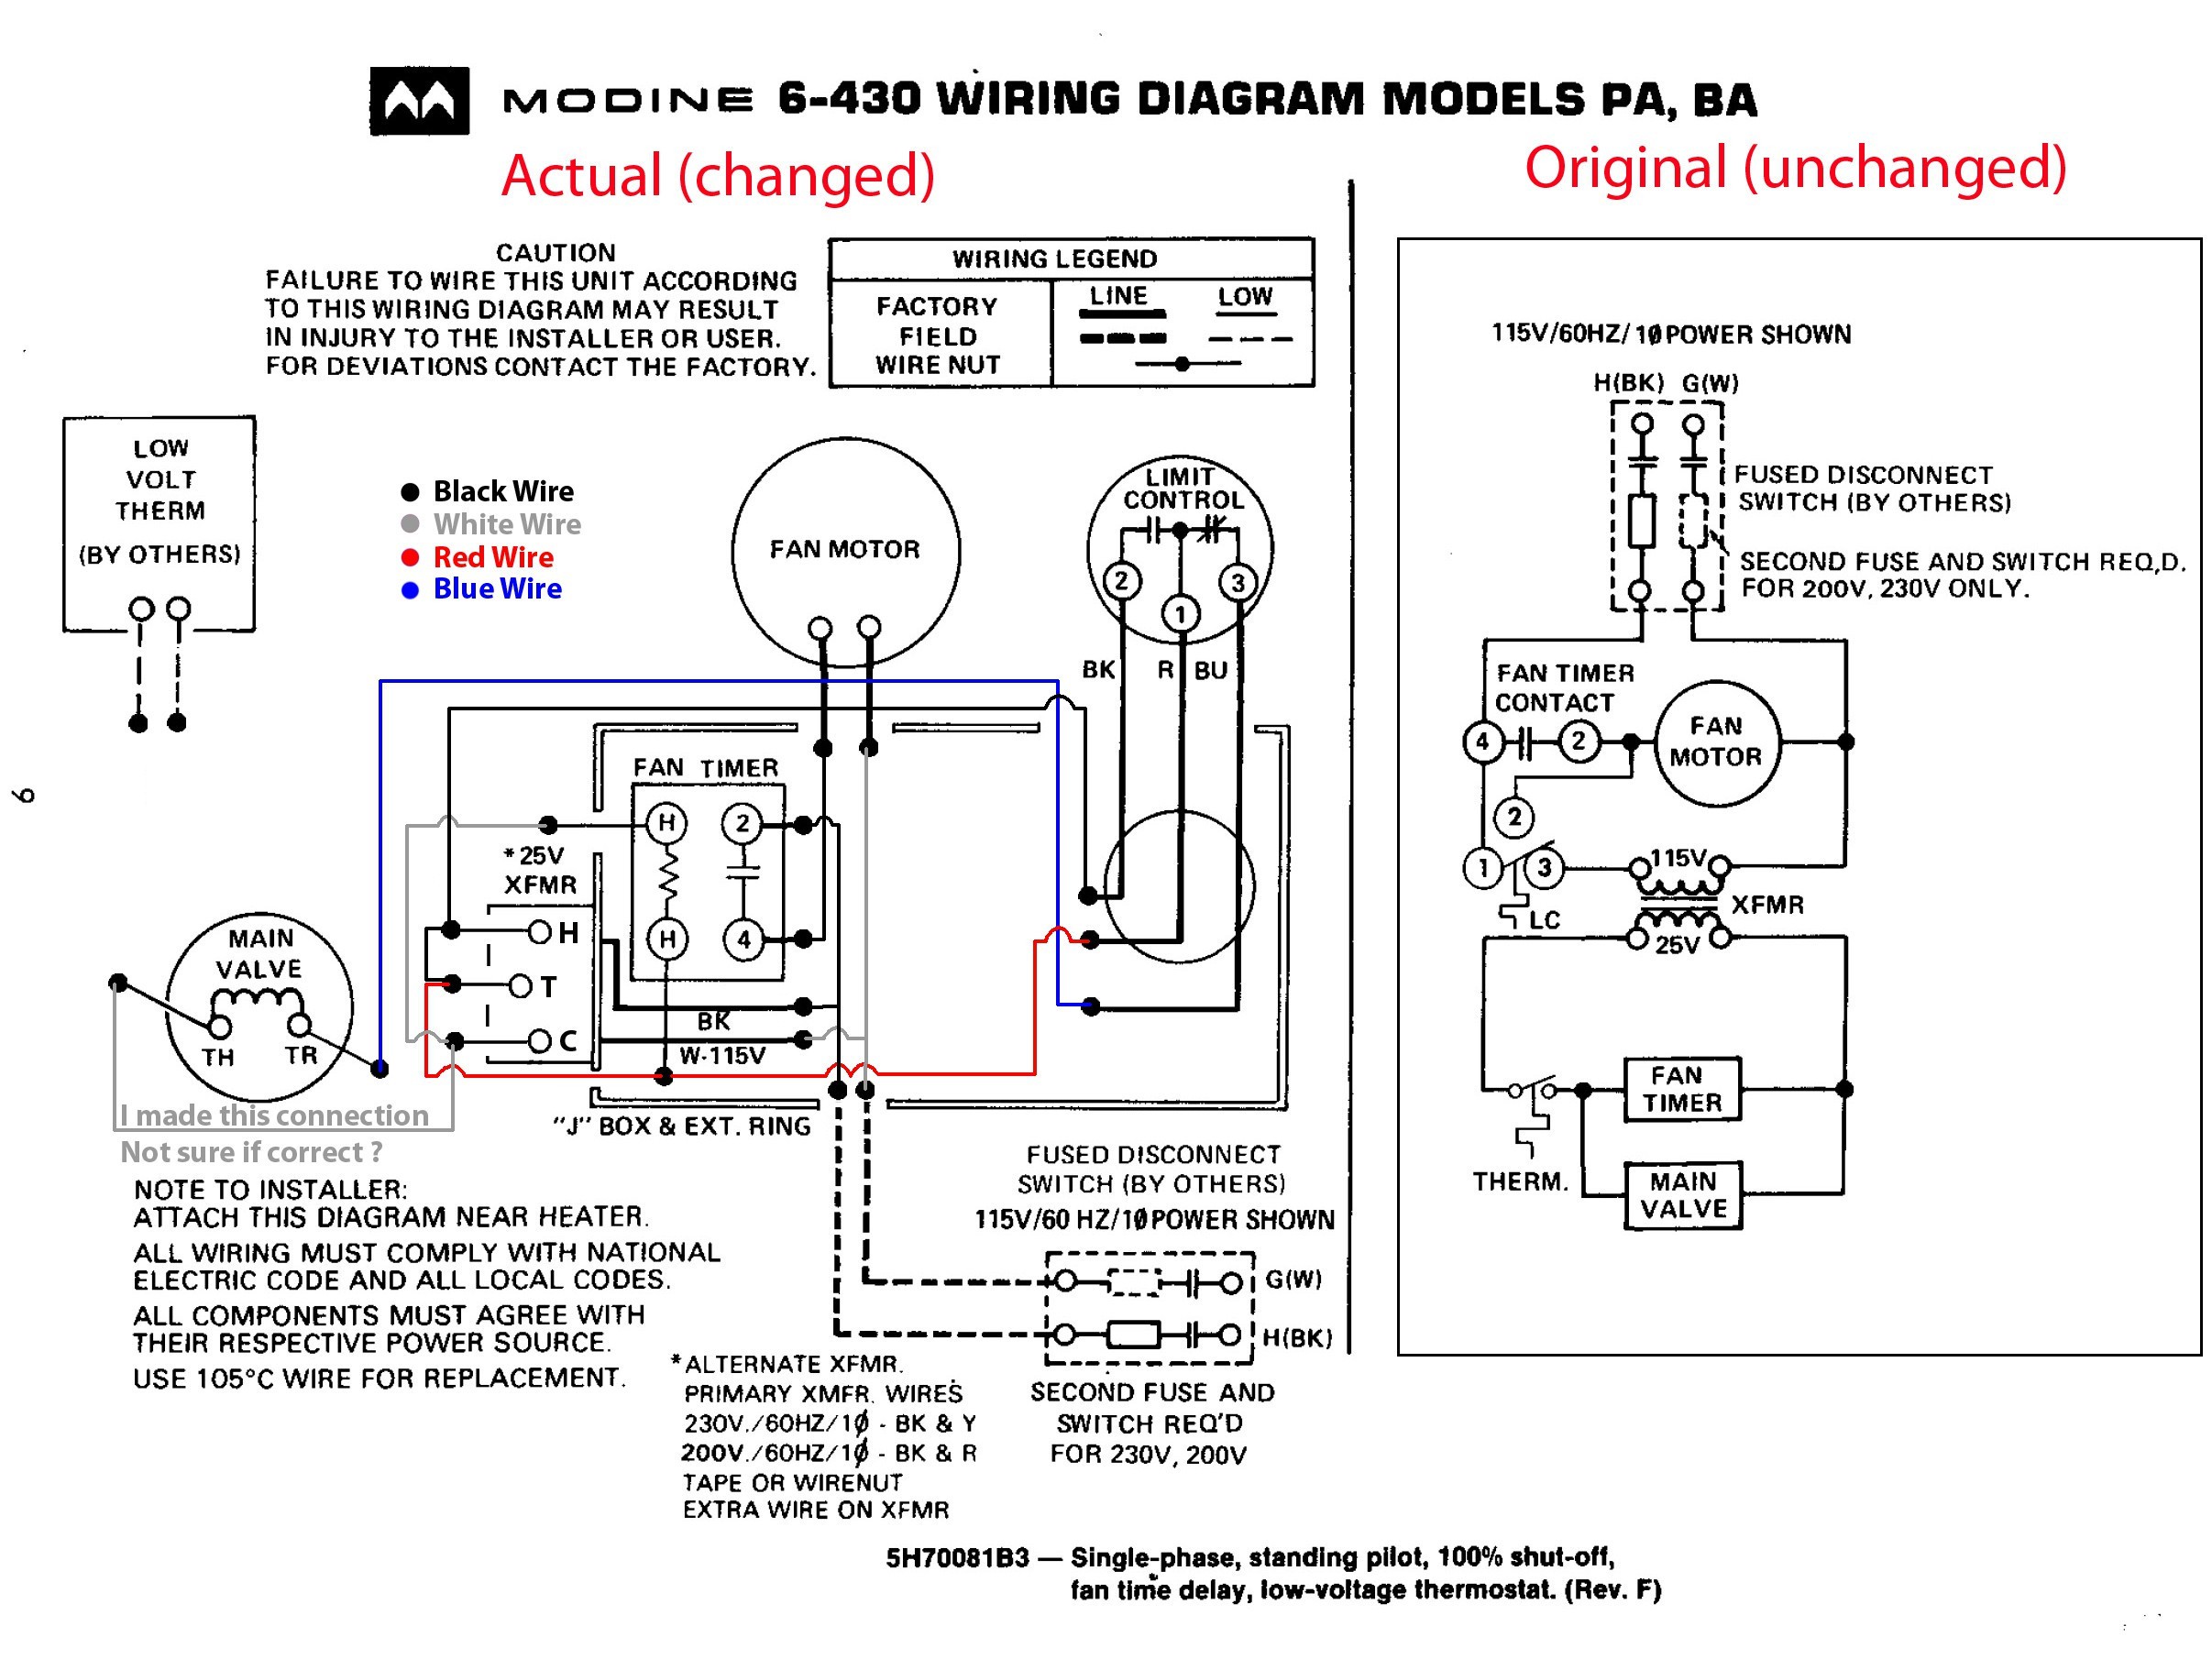 Williams Wall Furnace Wiring Diagram New Diagram Also Williams Wall Heater Wiring Diagram Likewise 12 Volt Dc